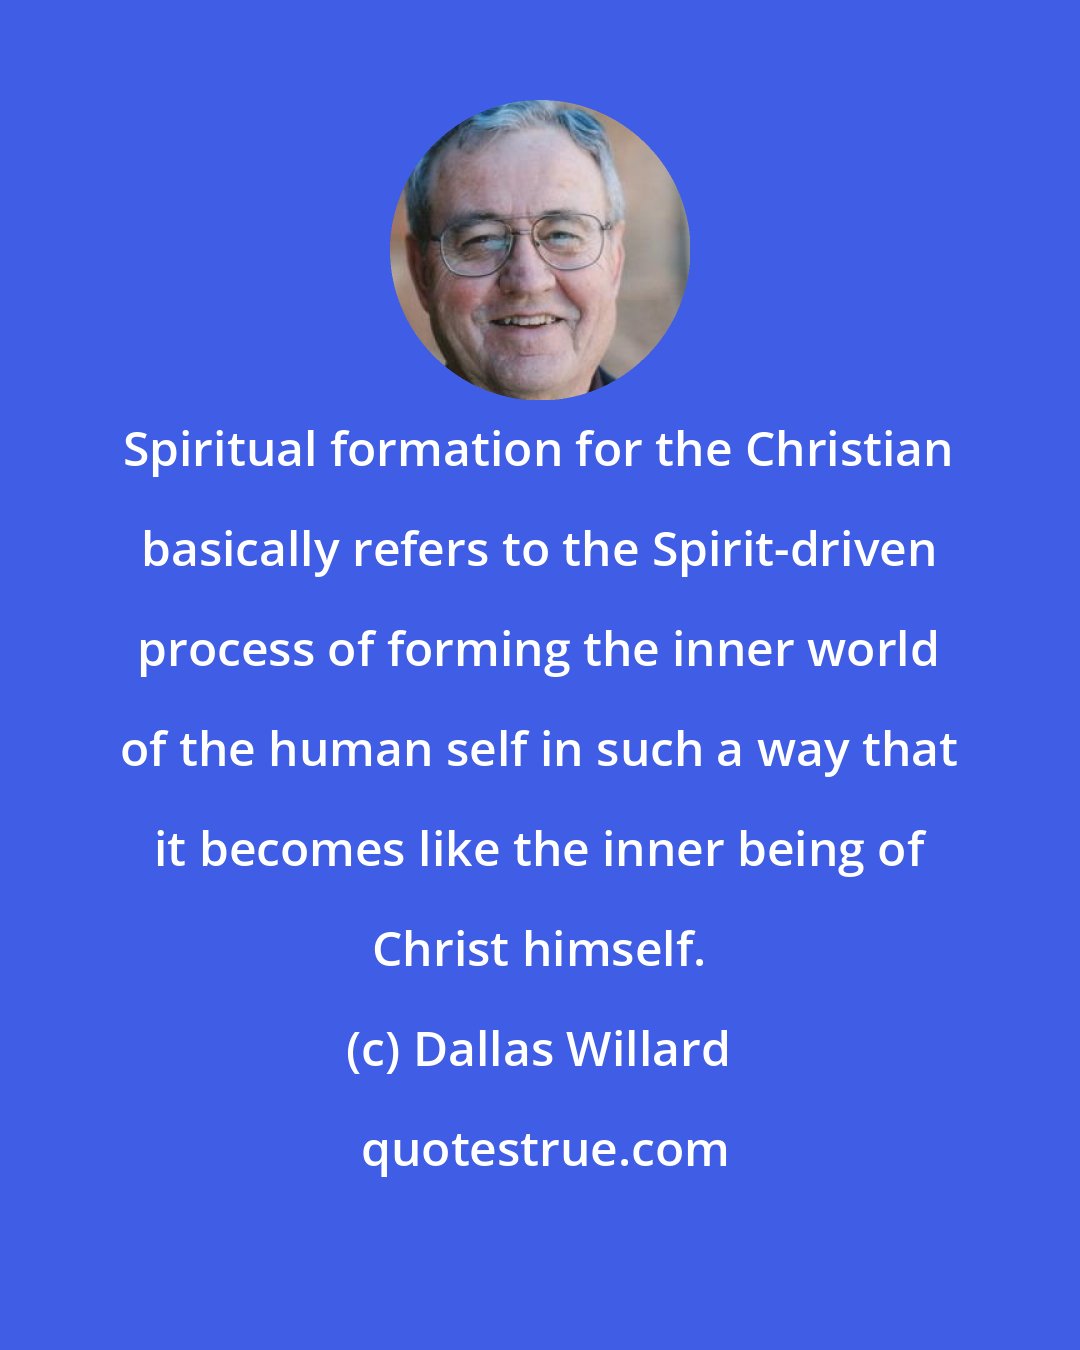 Dallas Willard: Spiritual formation for the Christian basically refers to the Spirit-driven process of forming the inner world of the human self in such a way that it becomes like the inner being of Christ himself.